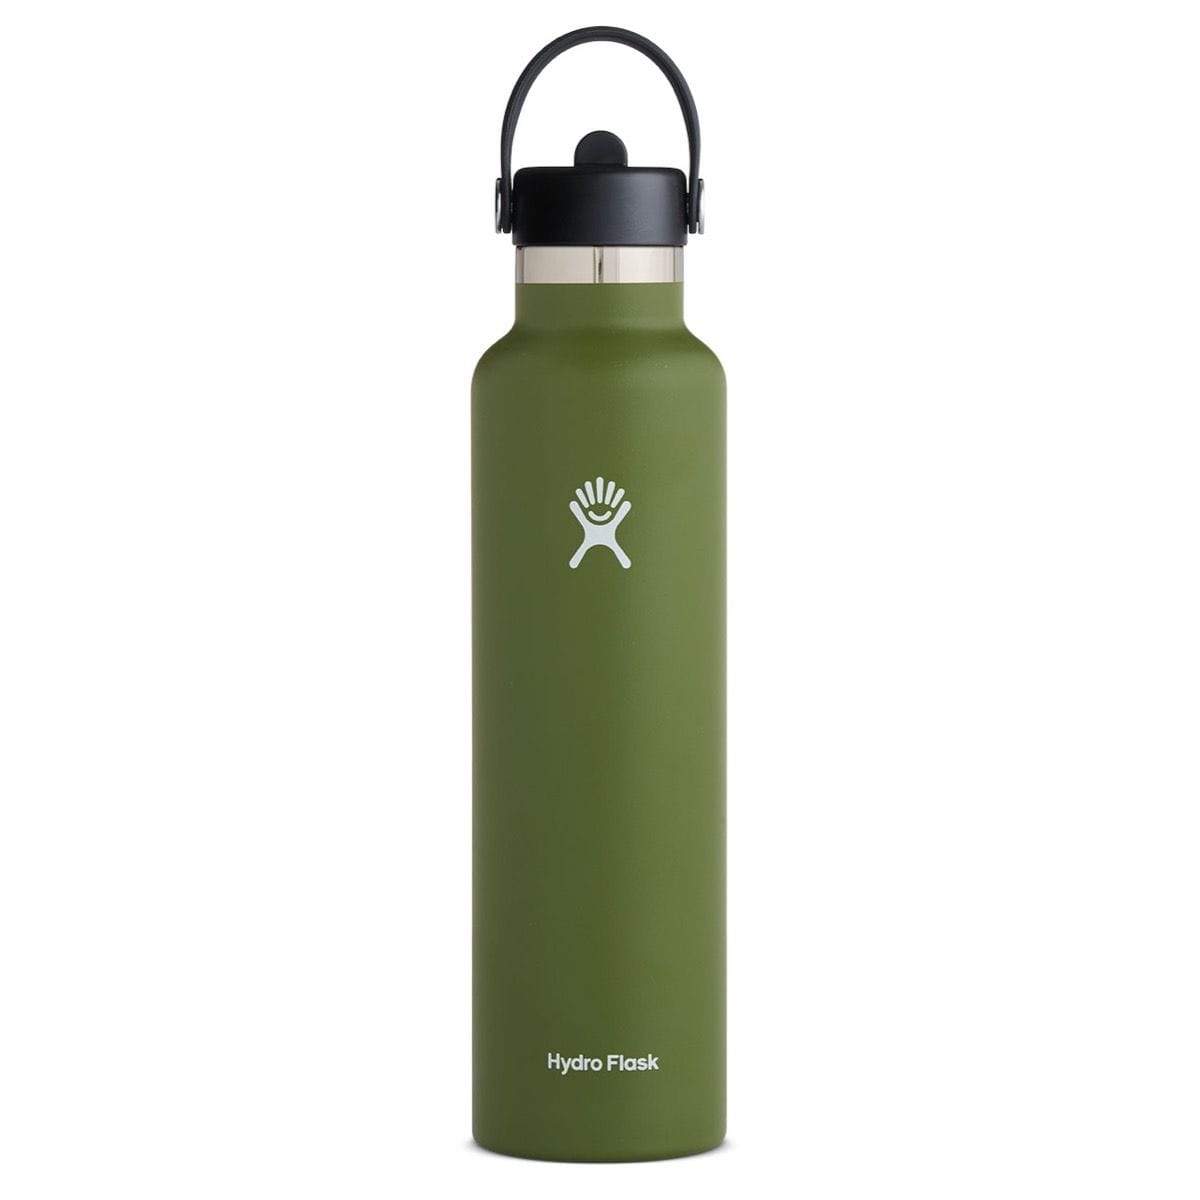 Hydro Flask Insulated Drinkware Hydro Flask 24 oz Standard Mouth Bottle with Flex Straw Cap - Olive